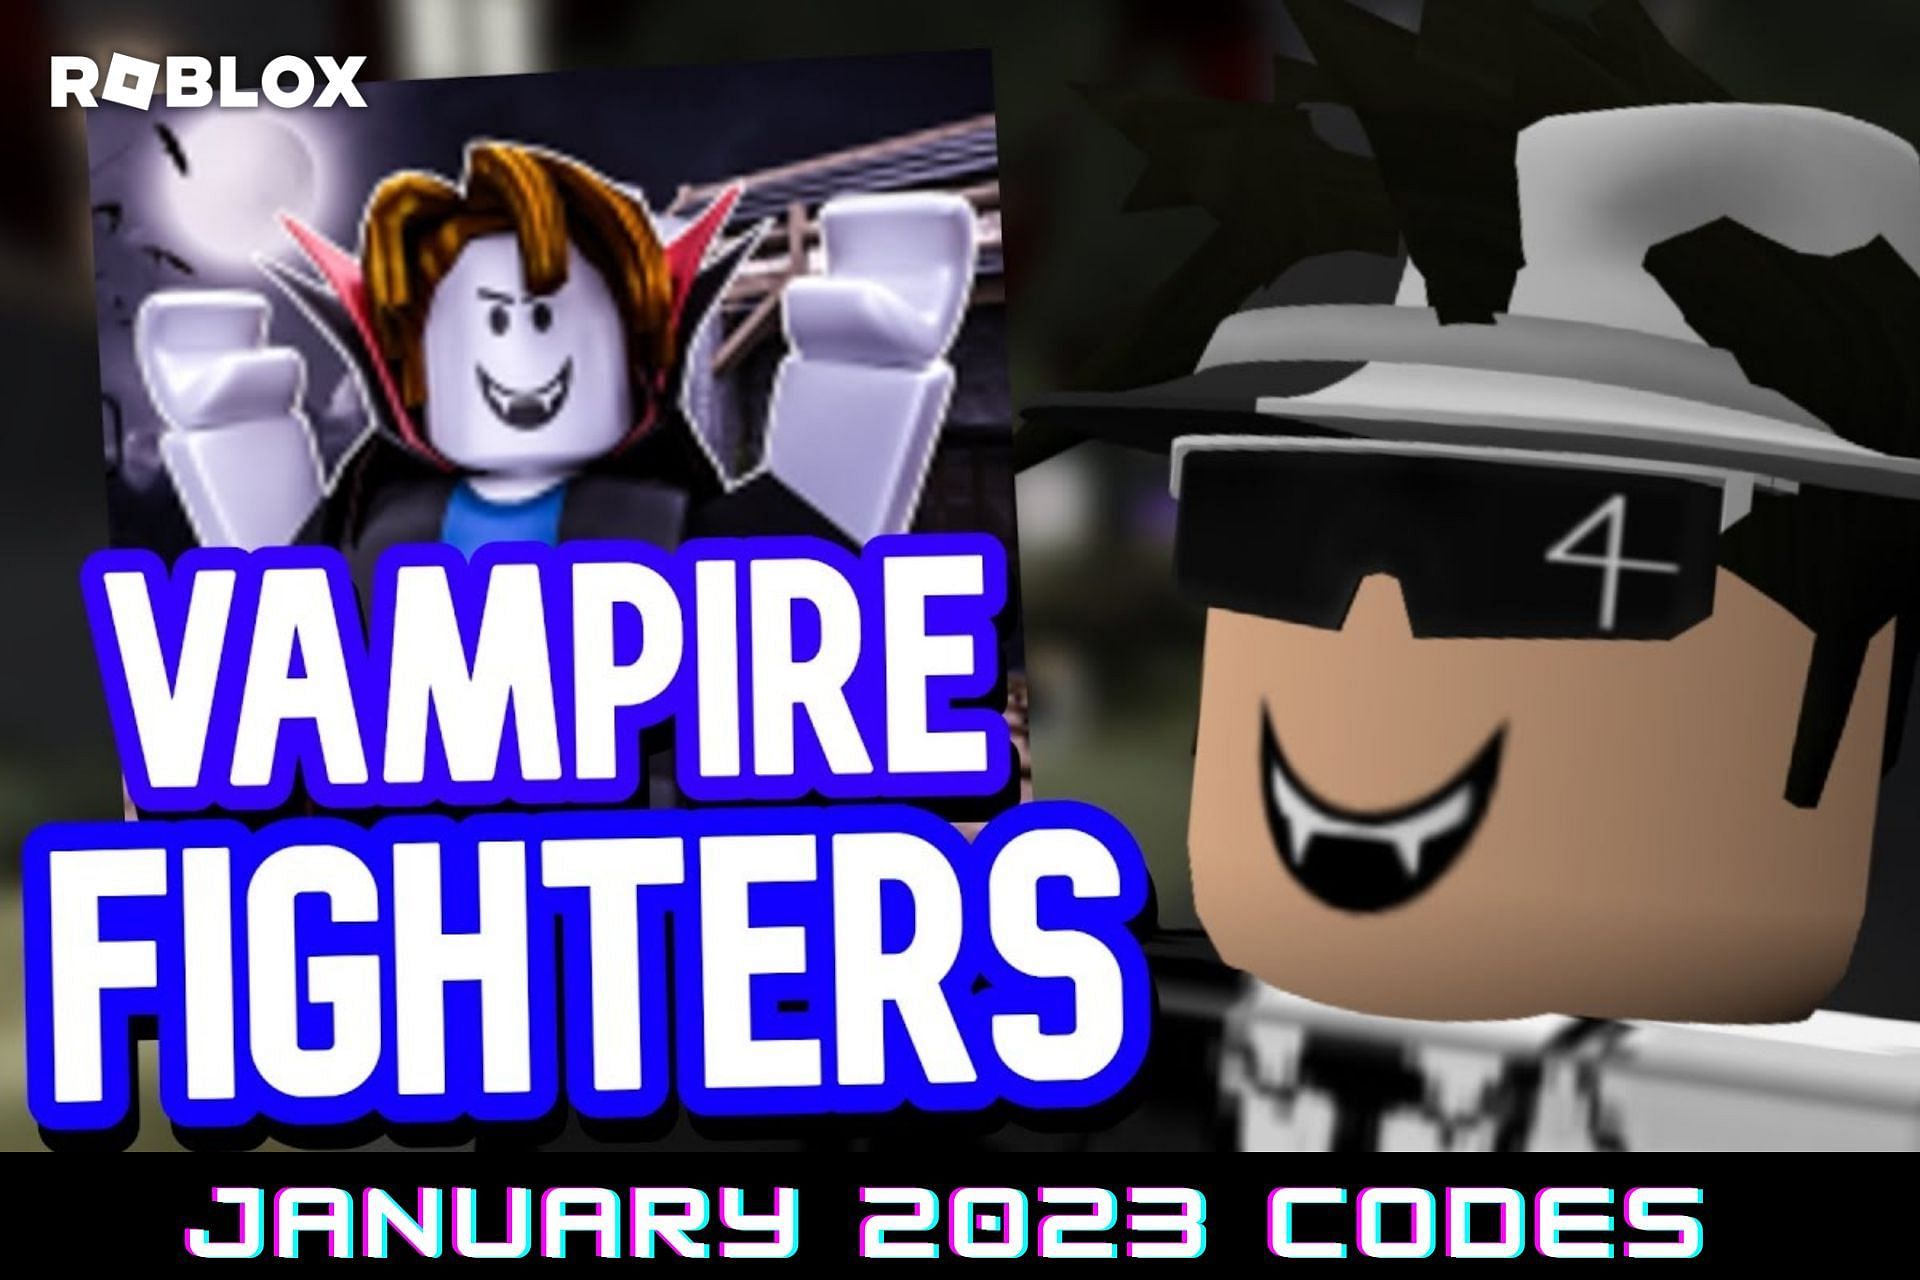 Roblox Vampire Fighters codes for January 2023: Free coins and boosts